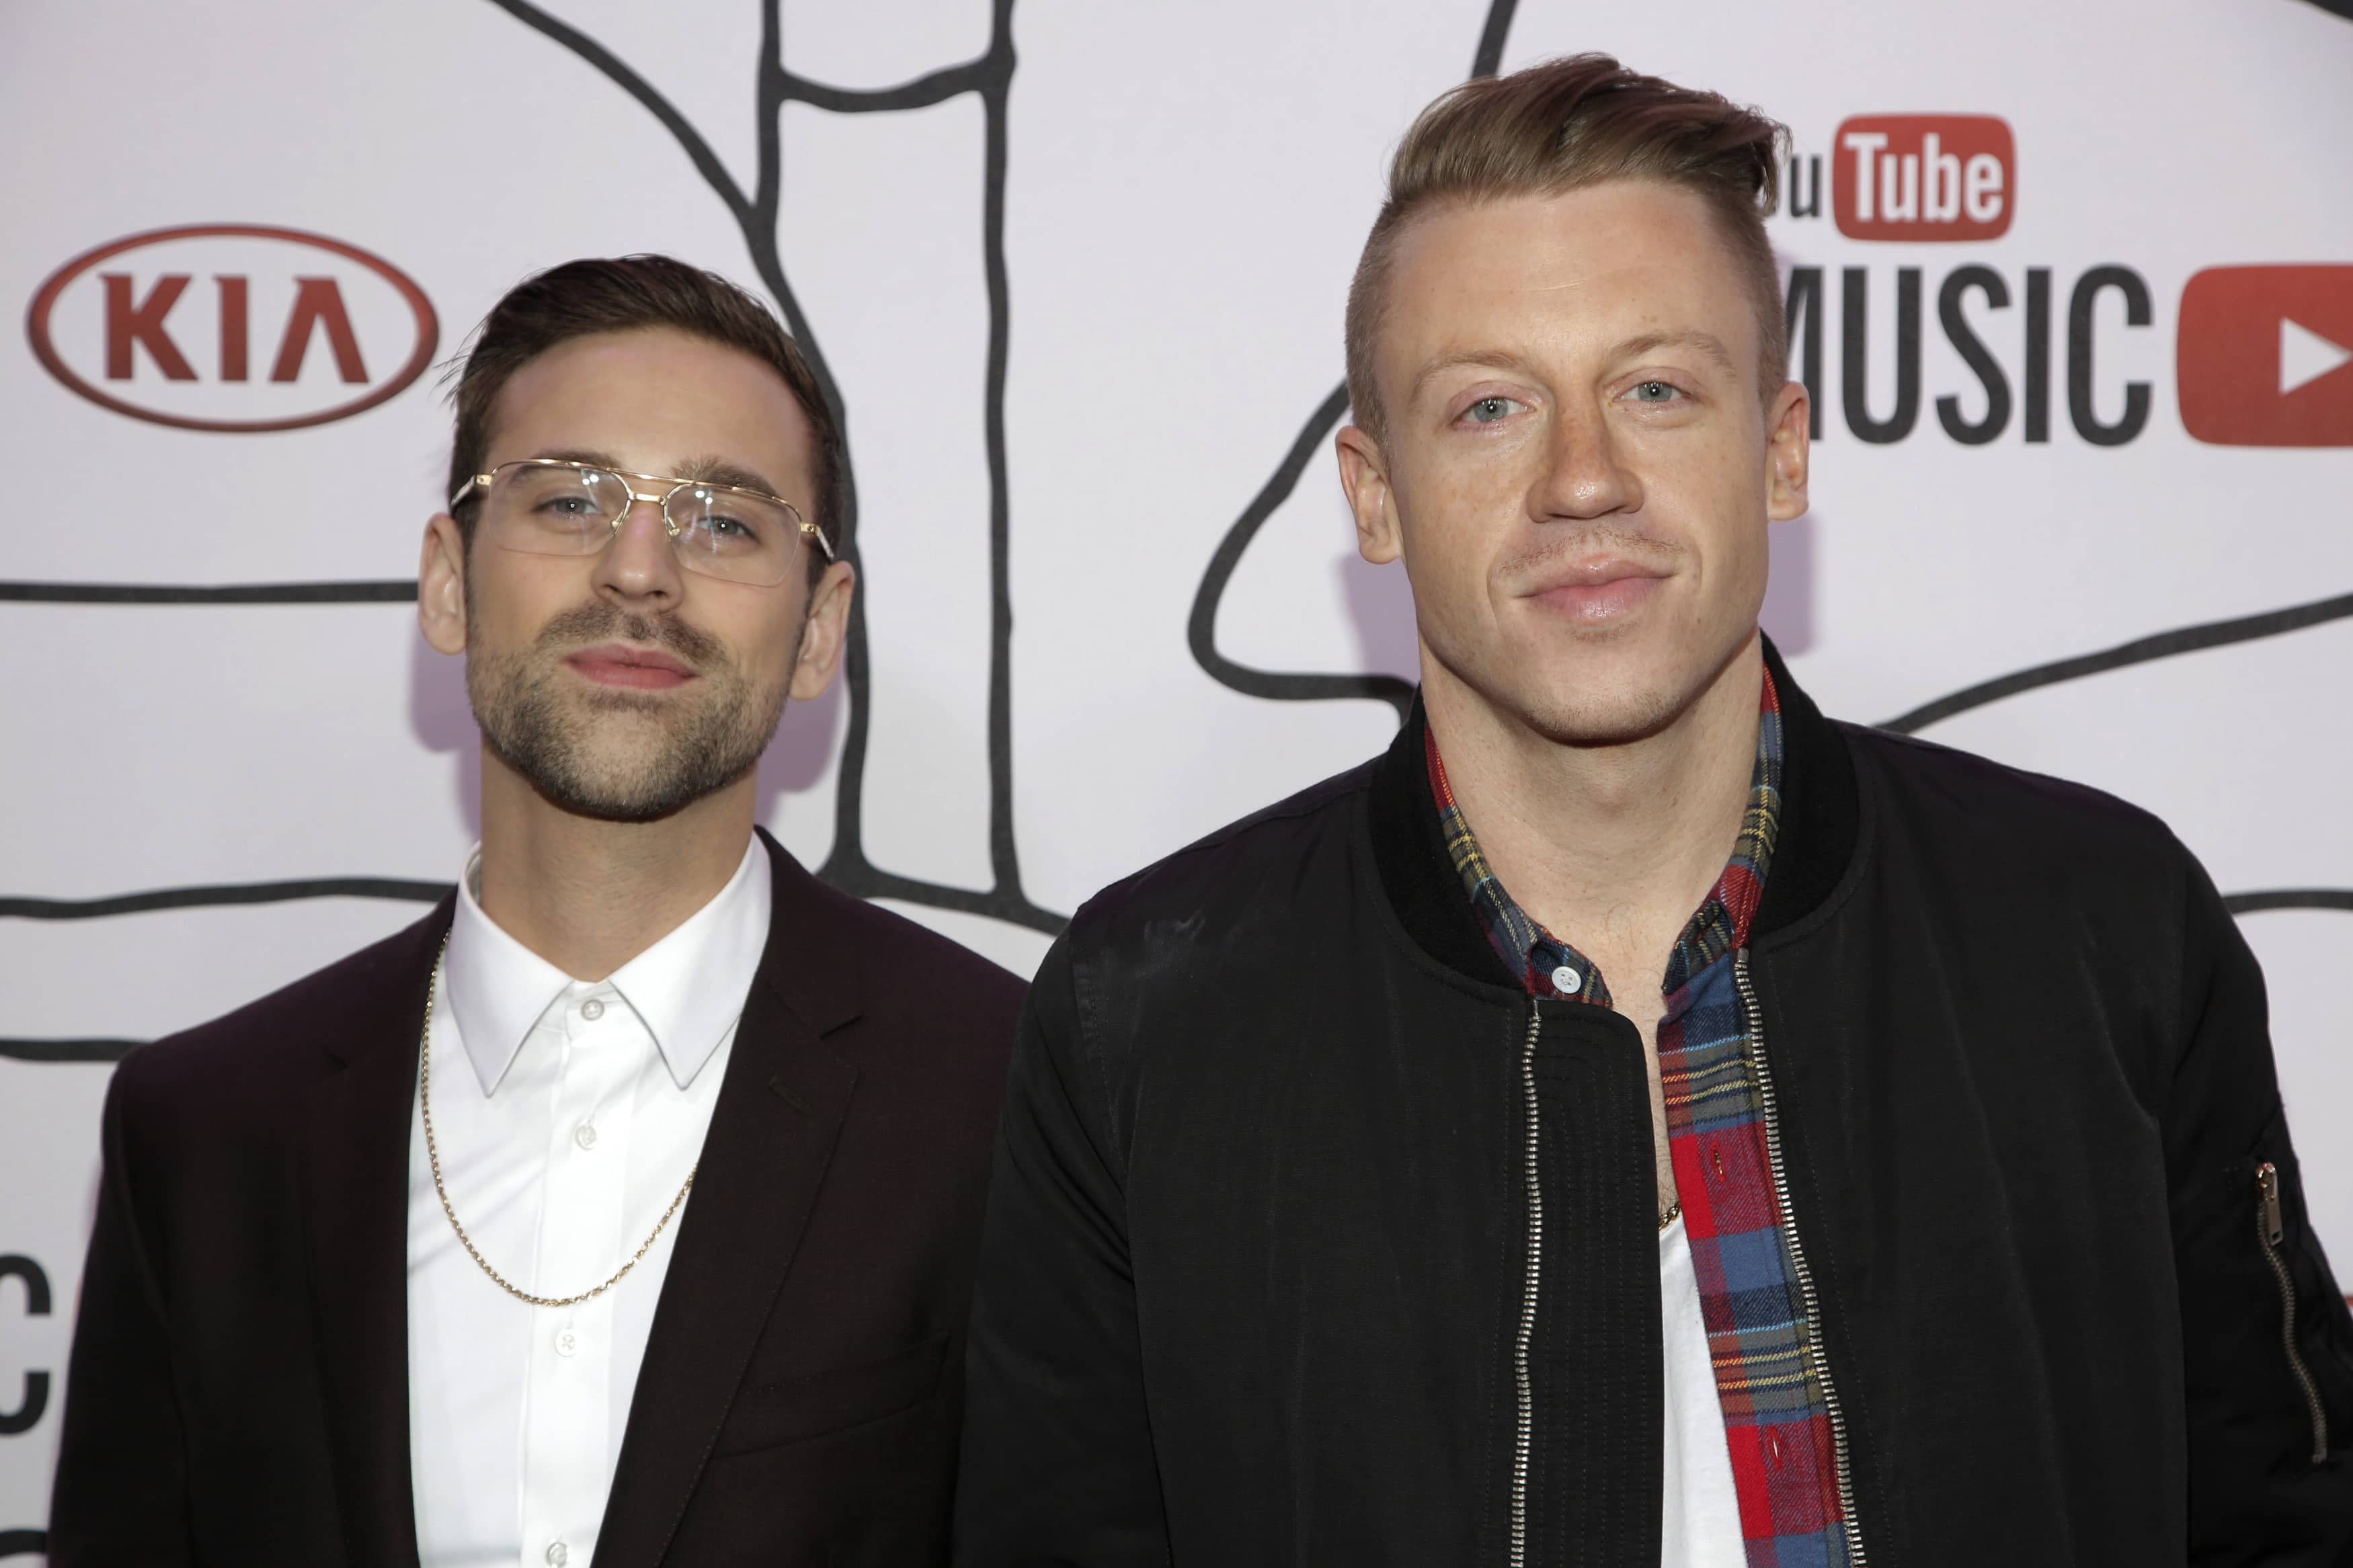 ryan-lewis-and-macklemore-attend-the-youtube-music-awards-in-new-york